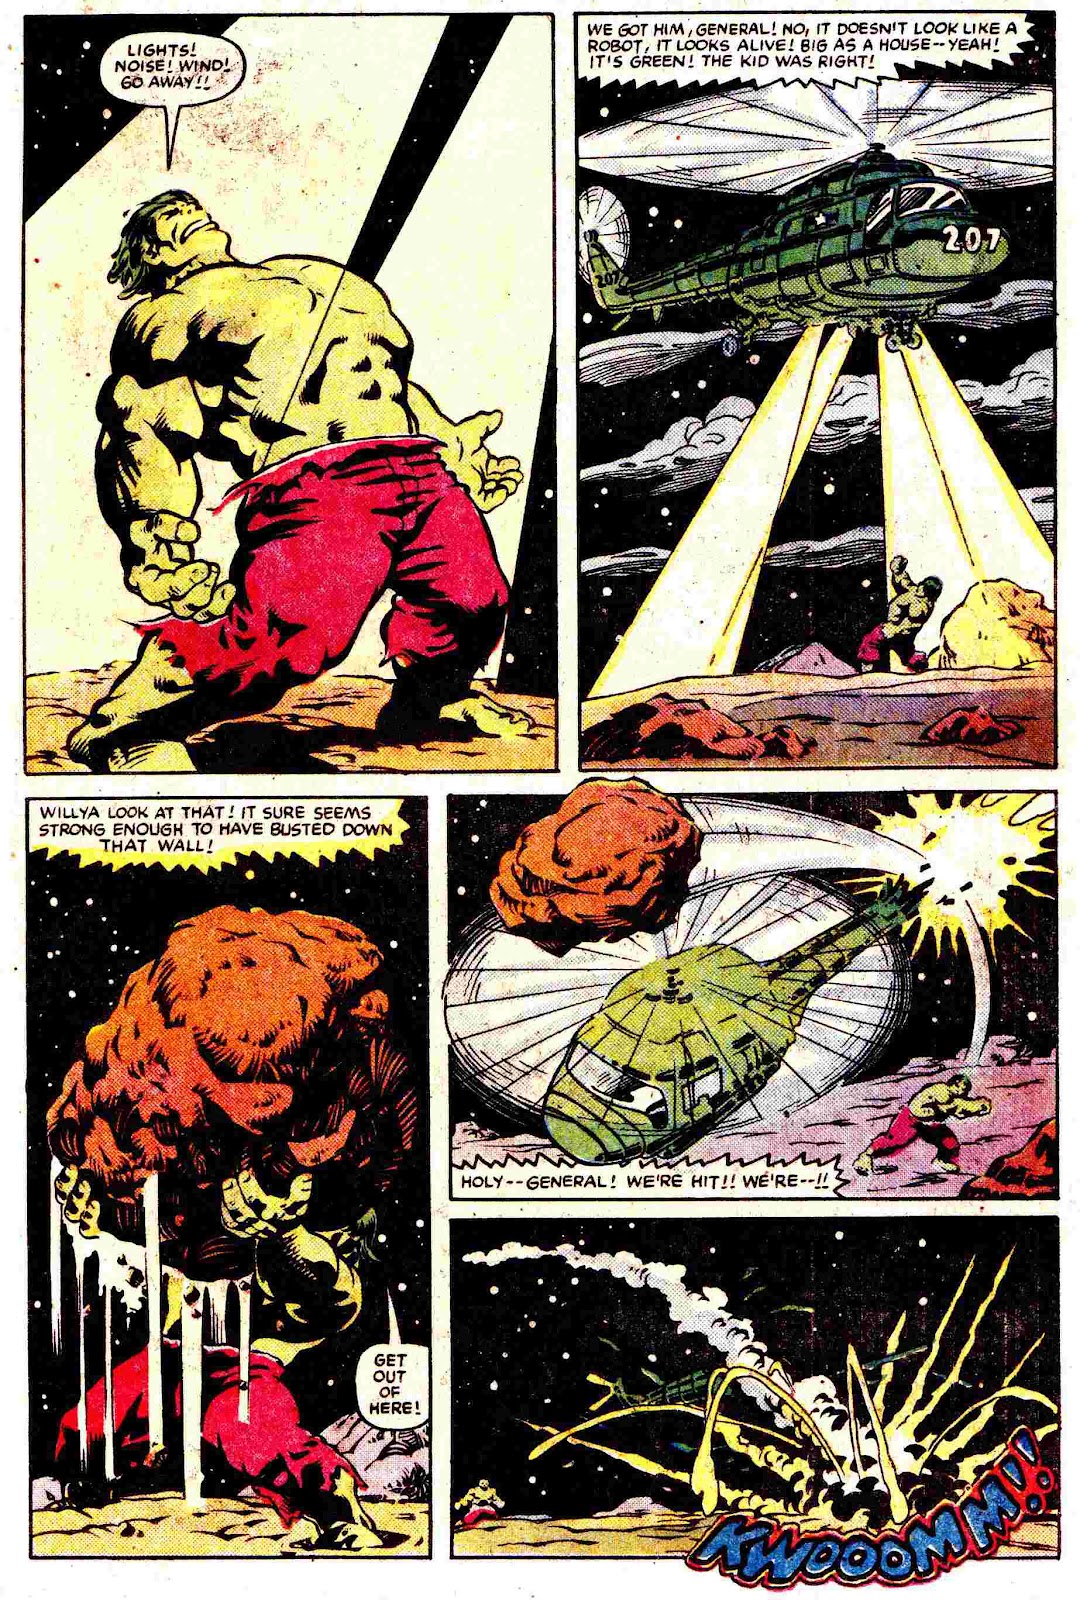 What If? (1977) issue 45 - The Hulk went Berserk - Page 8